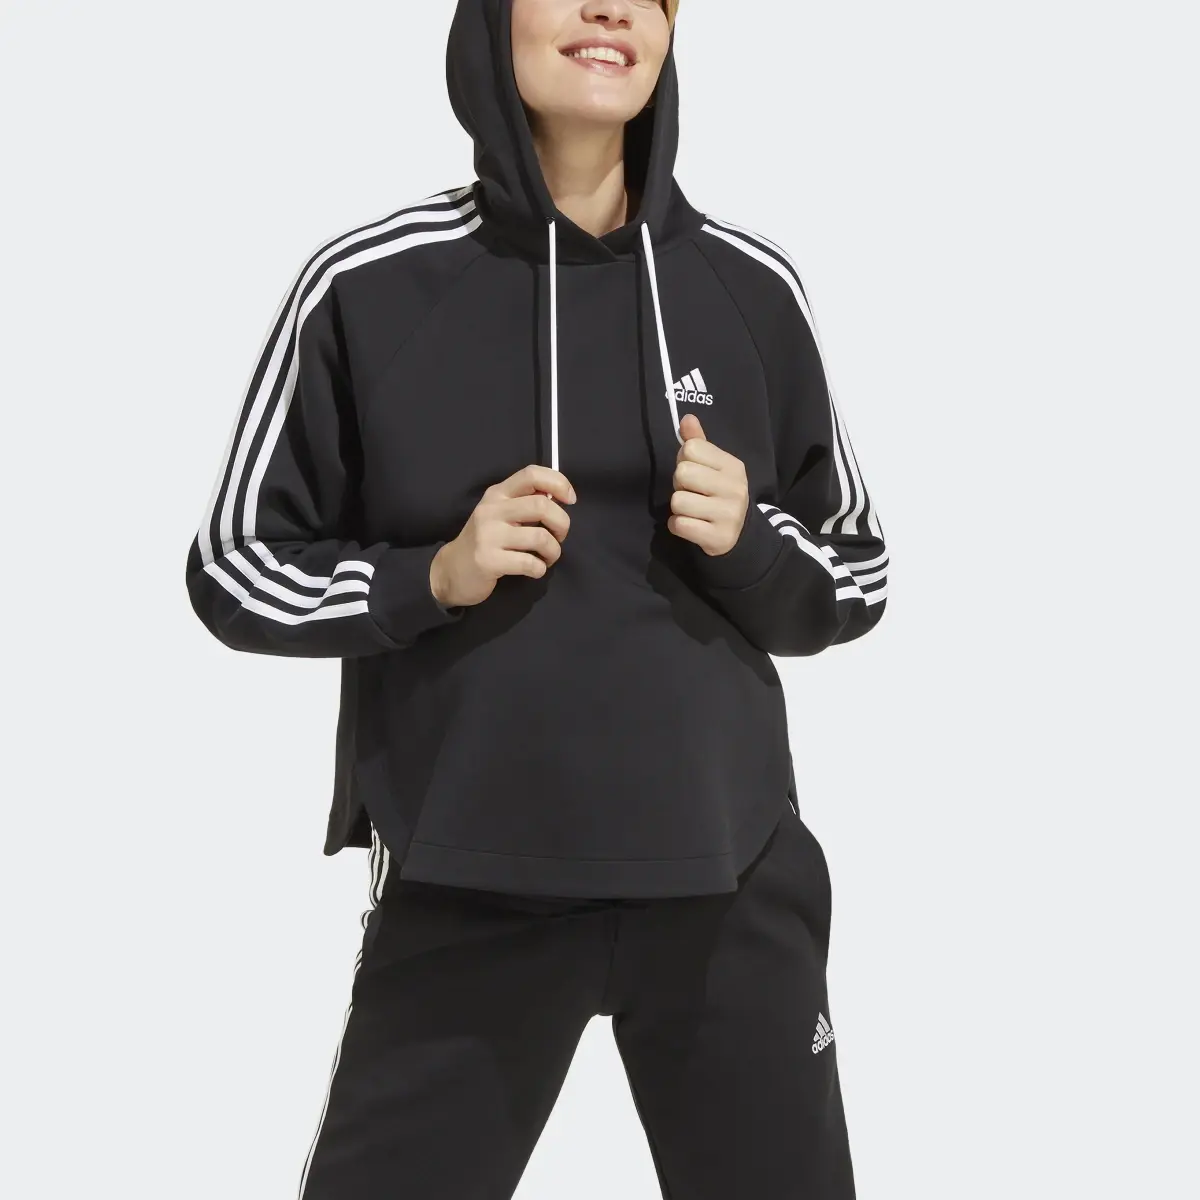 Adidas Maternity Over-the-Head Hoodie. 1